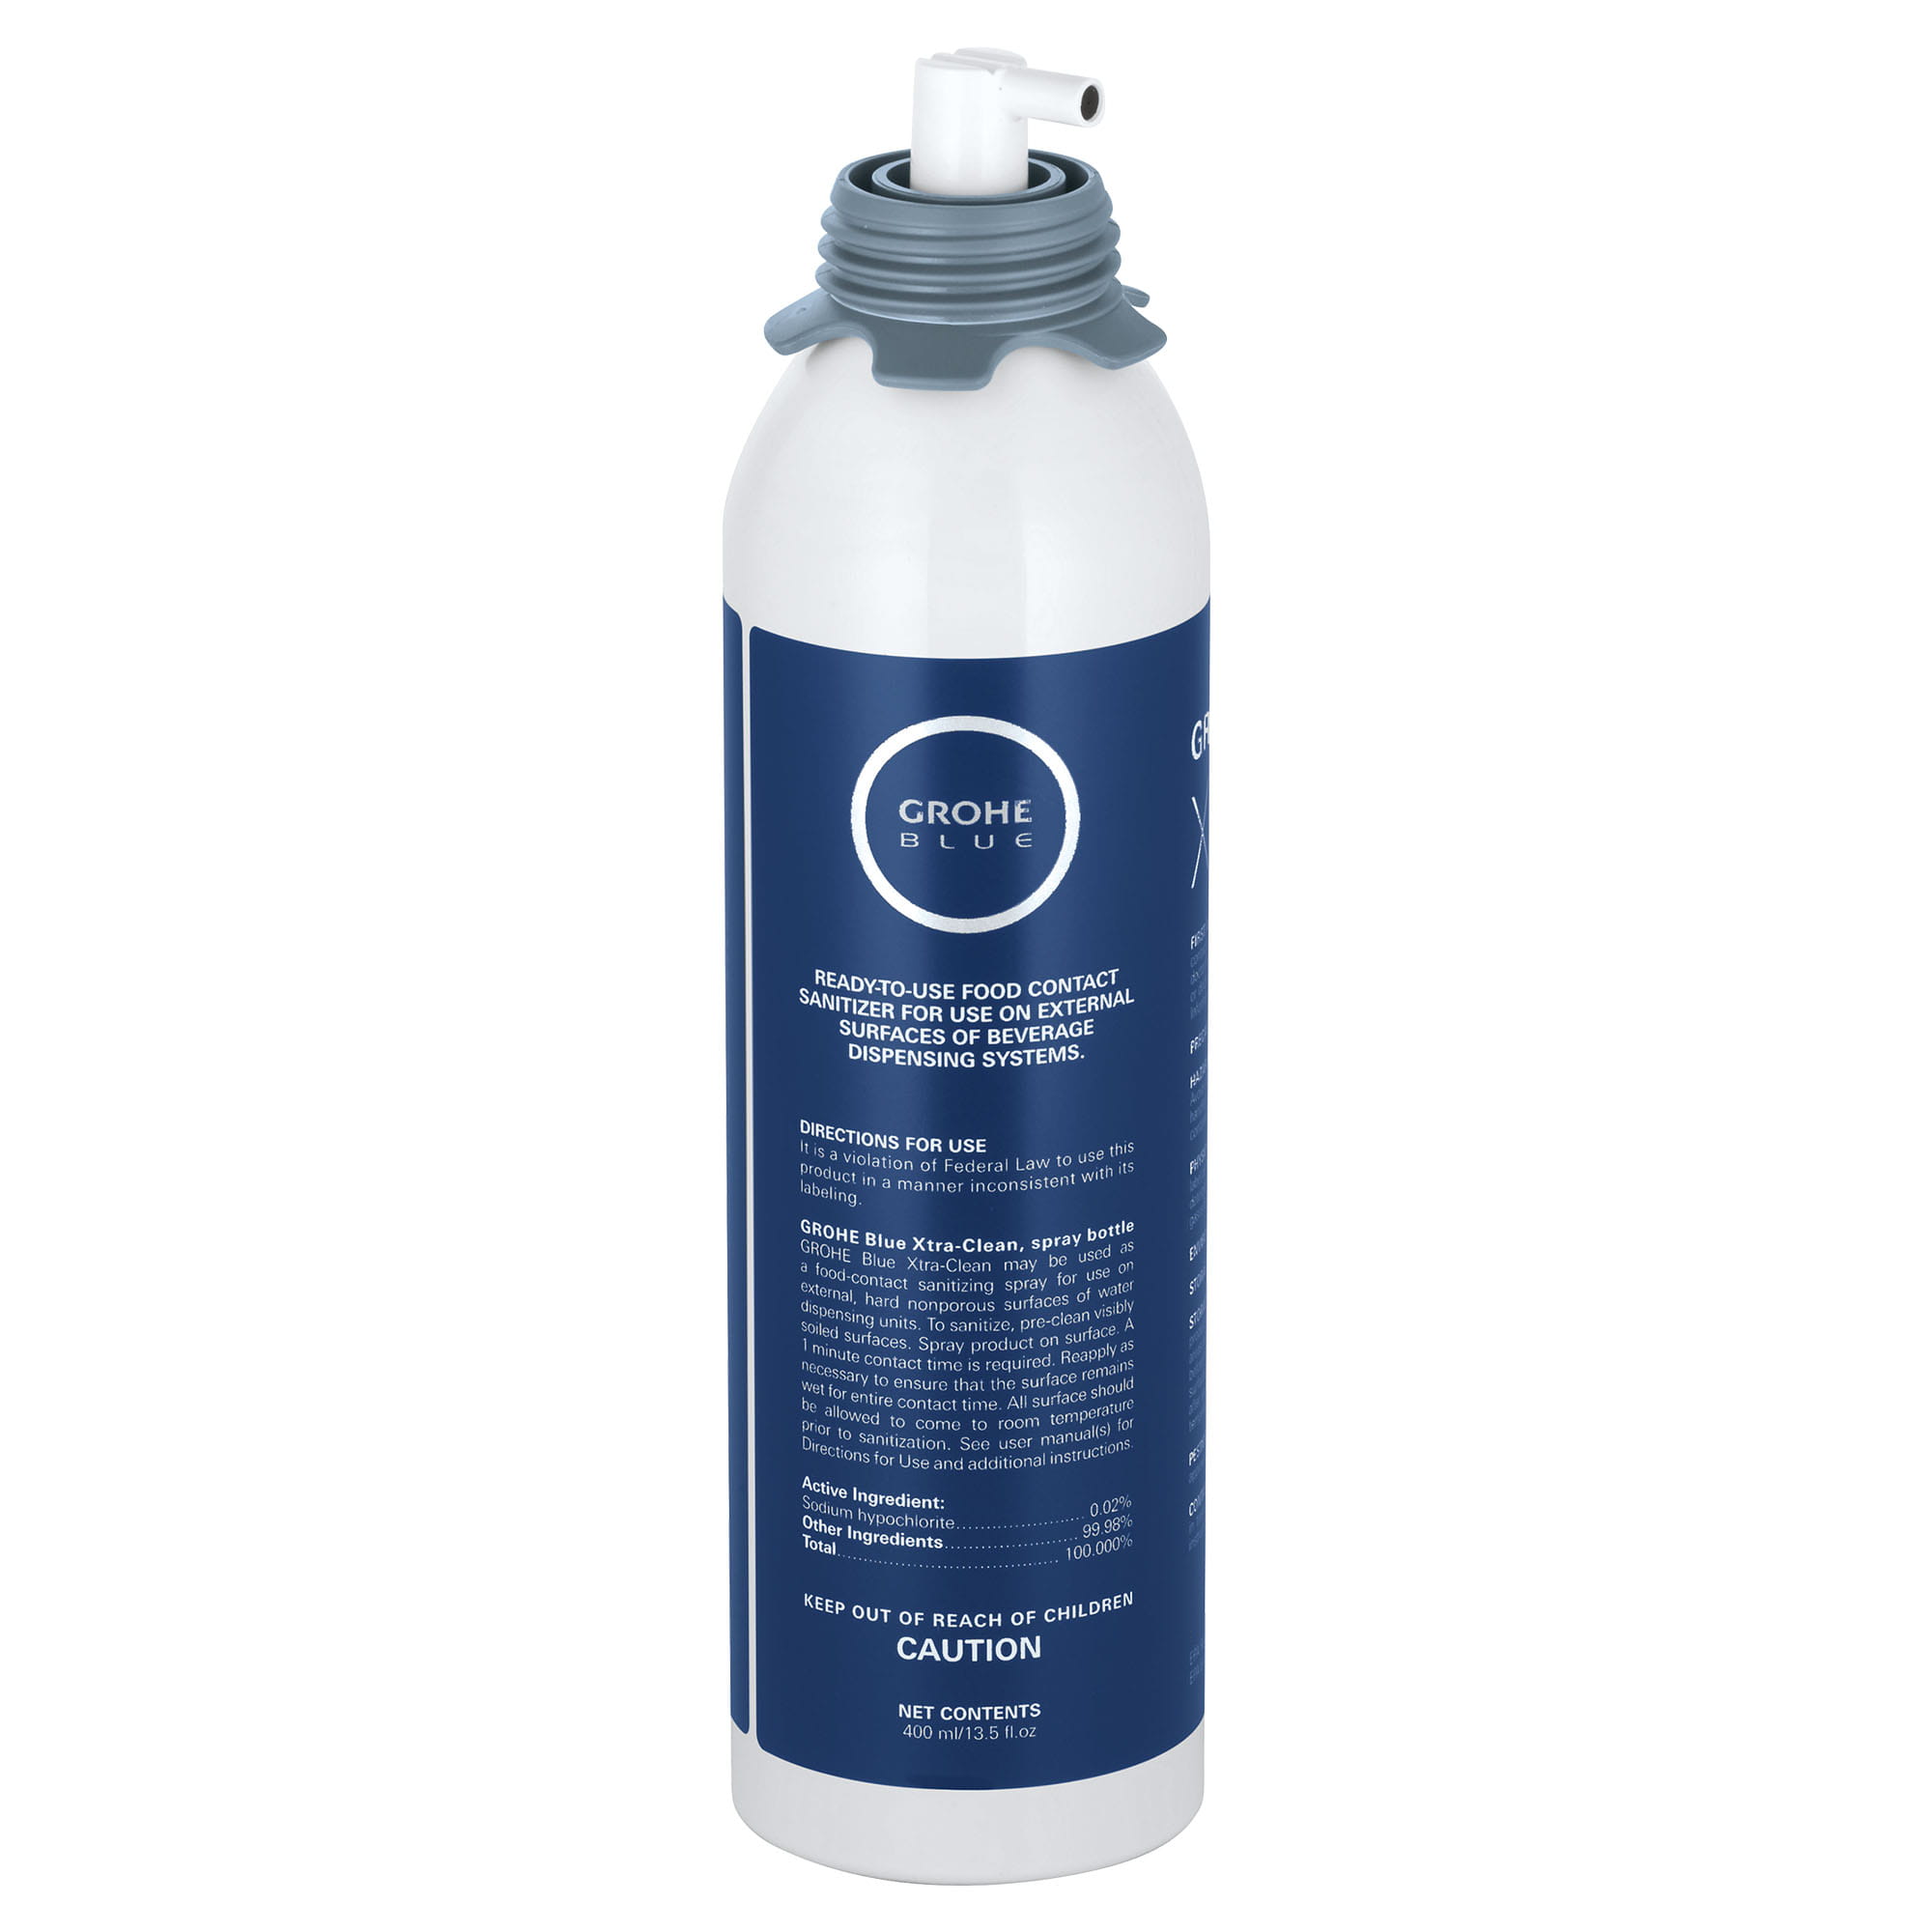 GROHE Blue® Cleaning Cartridge